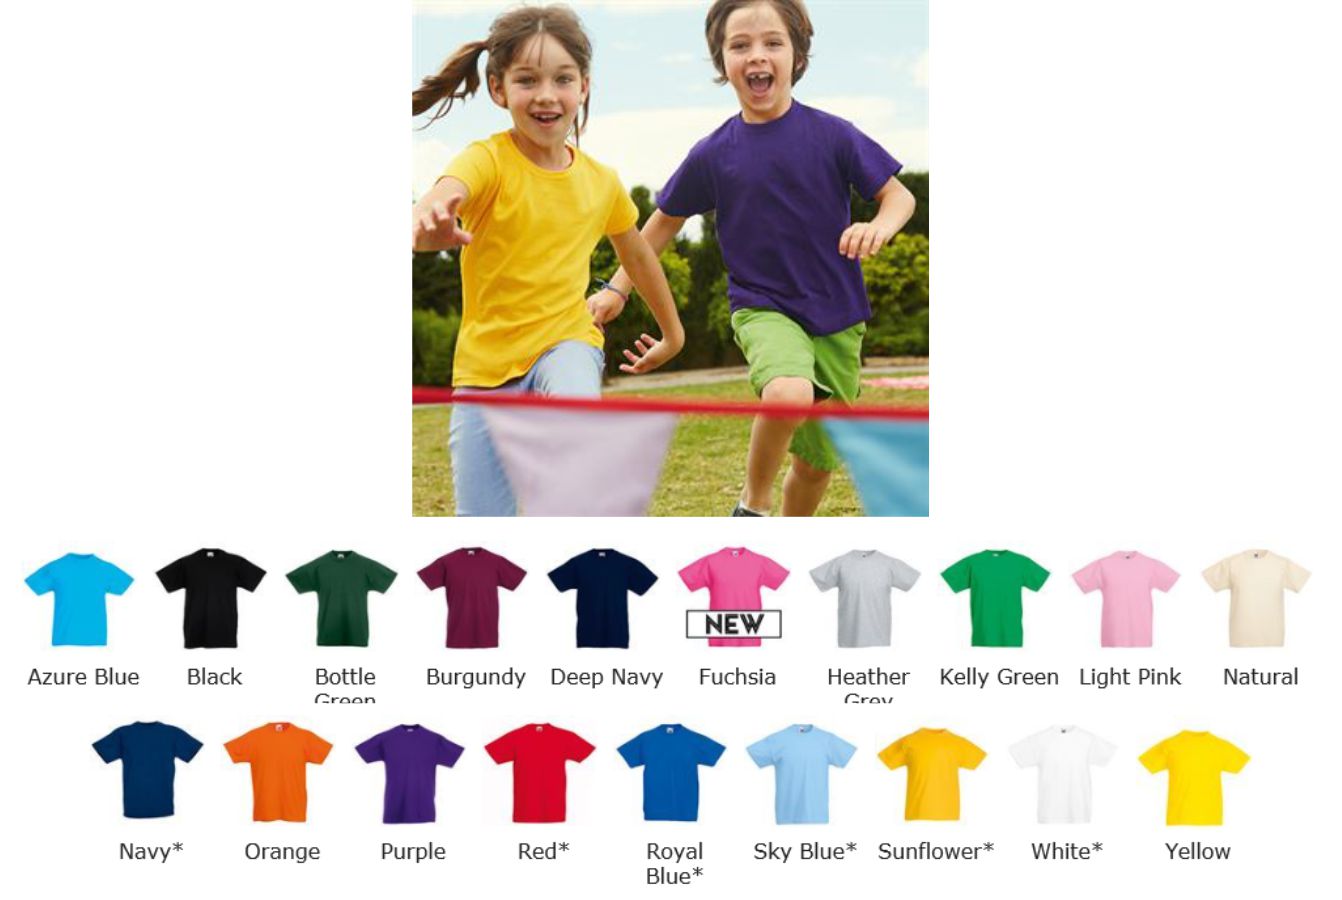 Fruit of the loom SS6B Childs Value Weight tee shirt